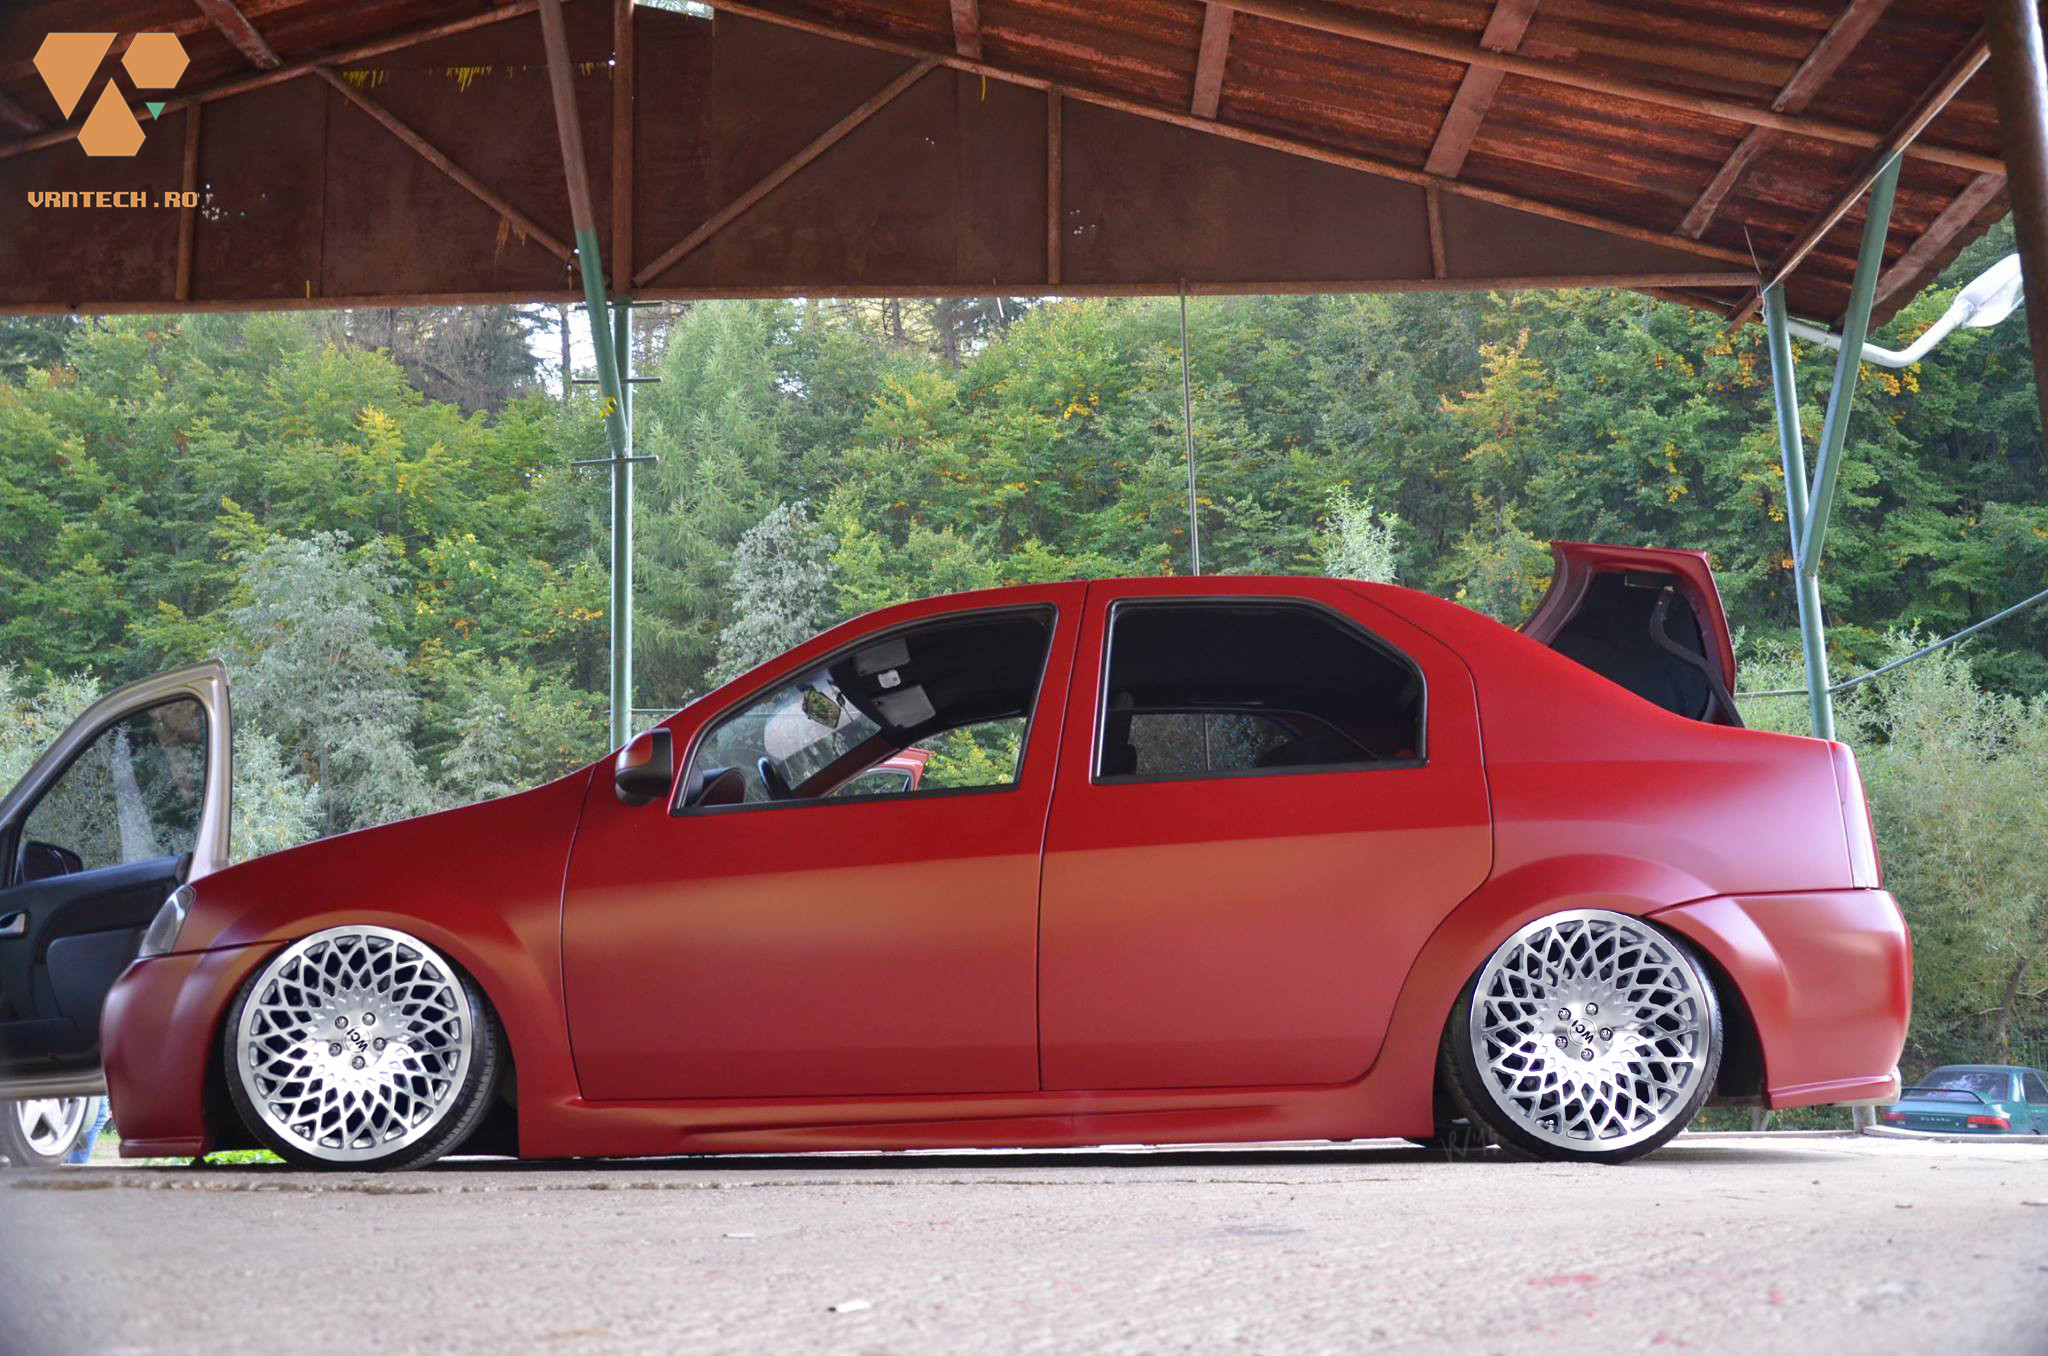 Side view with the WCI rims.